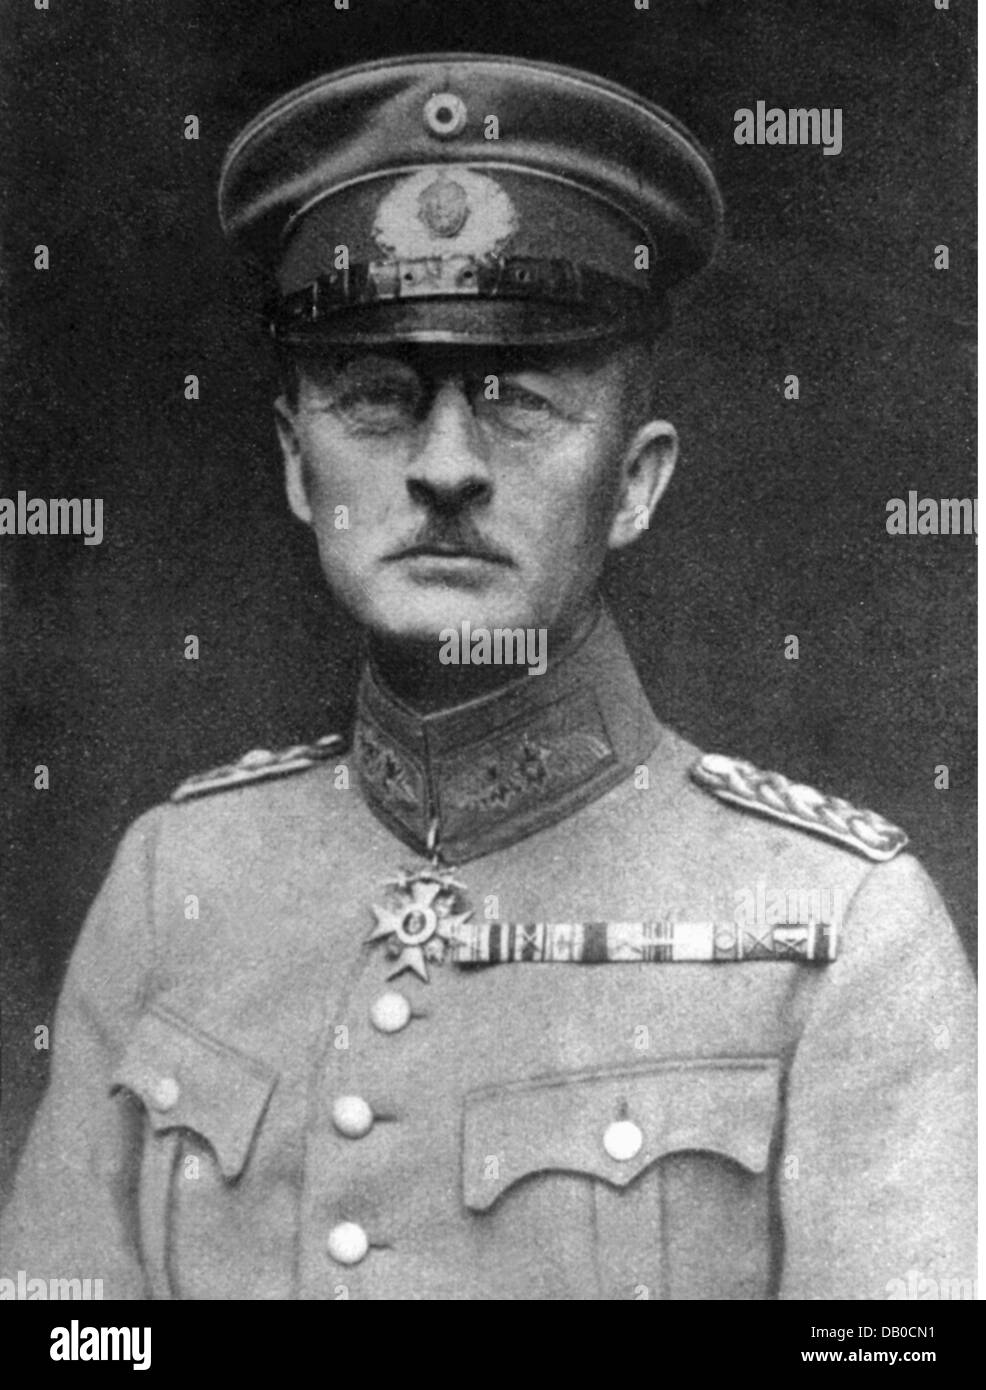 Lossow, Otto von, 15.1.1868 - 25.11.1938, German general, Commanding Officer of the 7th Infantry Division 28.9.1921 - 29.2.1924, portrait, 1920s, Stock Photo